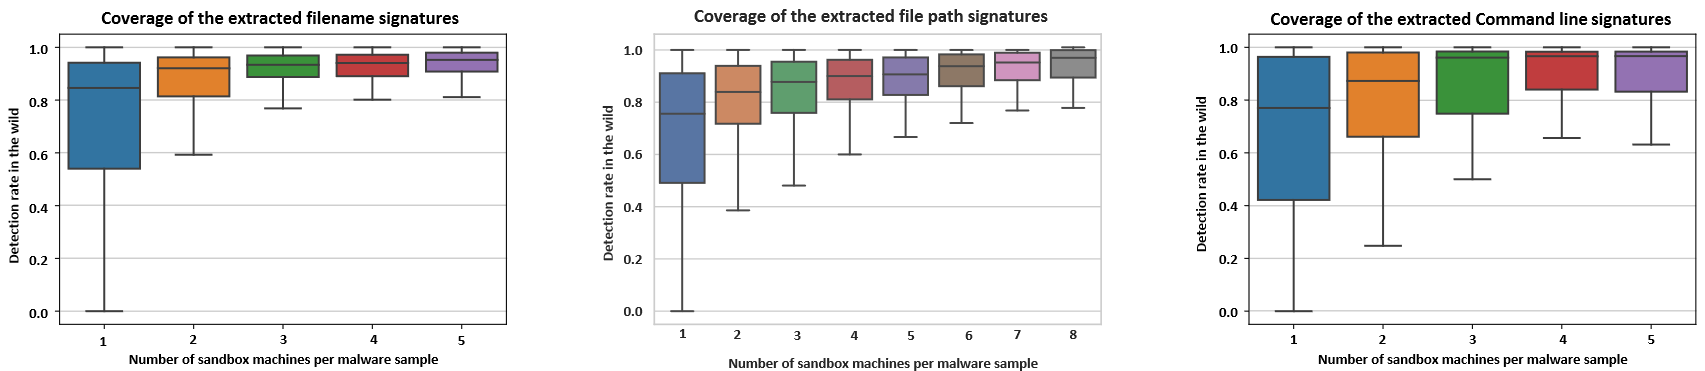 Figure 8: Total coverage obtained from N machines for 3 most common parameters.